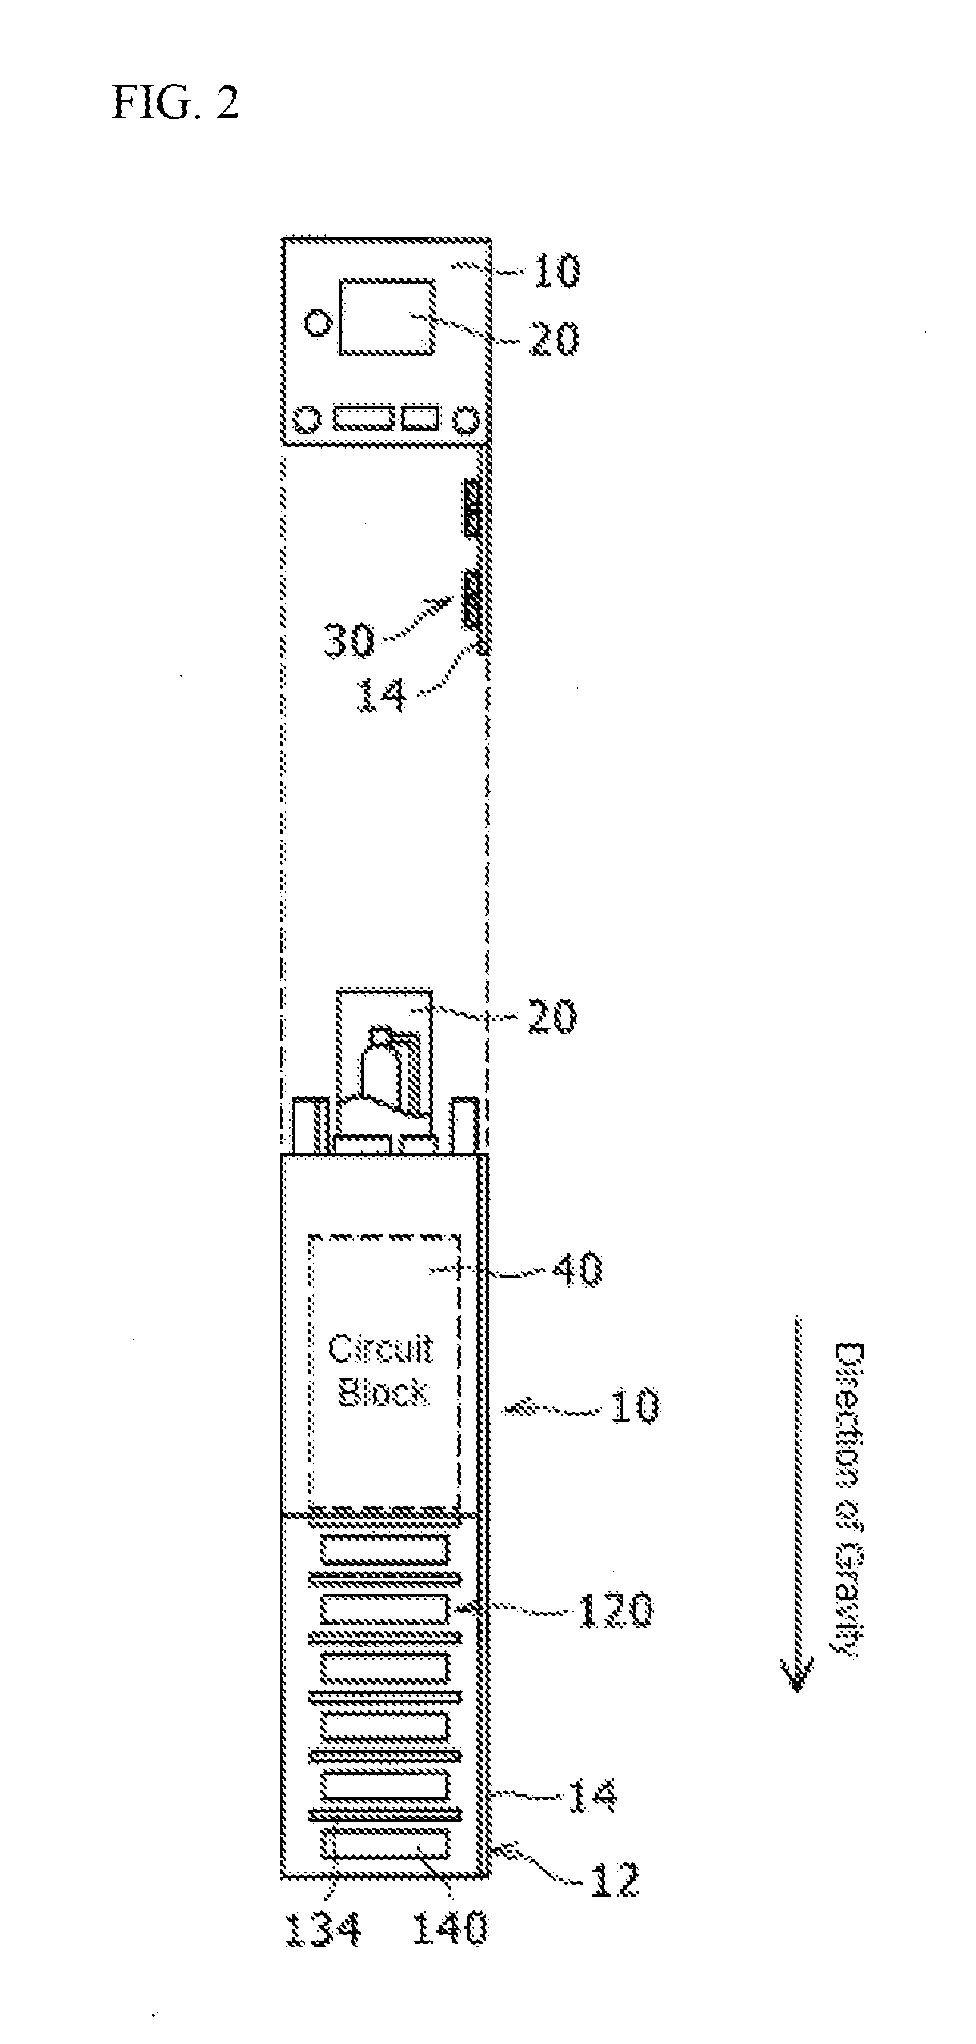 Electrical storage system and rechargeable battery storage system rack